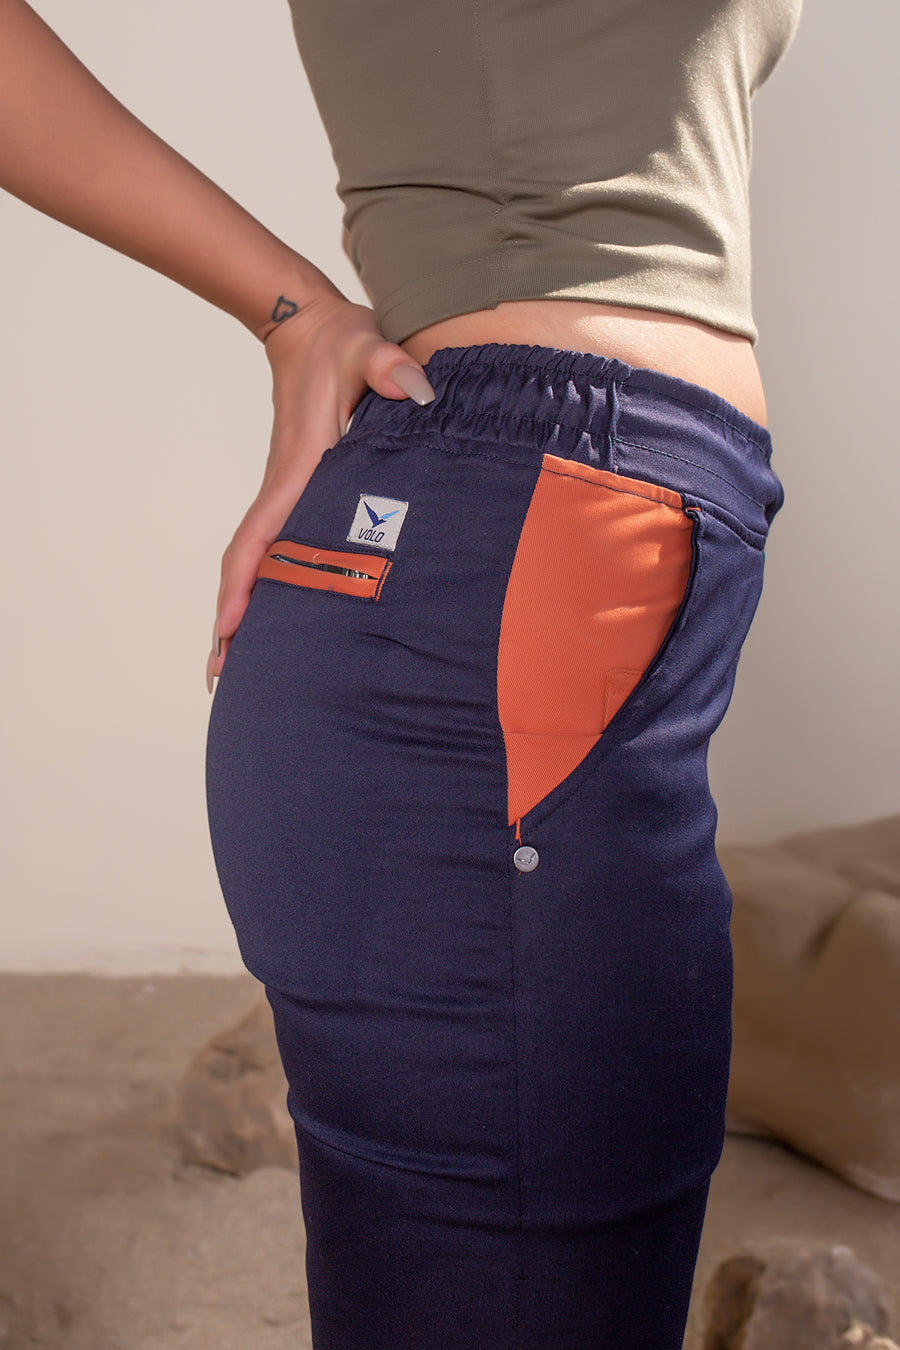 Women's Terra Joggers Navy Orange | VOLO Apparel | Designed for you to rock climb, hike, yoga, run or just chill. The most versatile athletic joggers that are fitted for your every daily life and all your athletic endeavors. The Earth Joggers comes with five pockets, features a 3 point gusset, 2 zipper pockets, snap buttons, and a breathable stretchy spandex cotton twill. With an internal drawstring and a tailored fit, these are gonna be your go to adventure joggers.